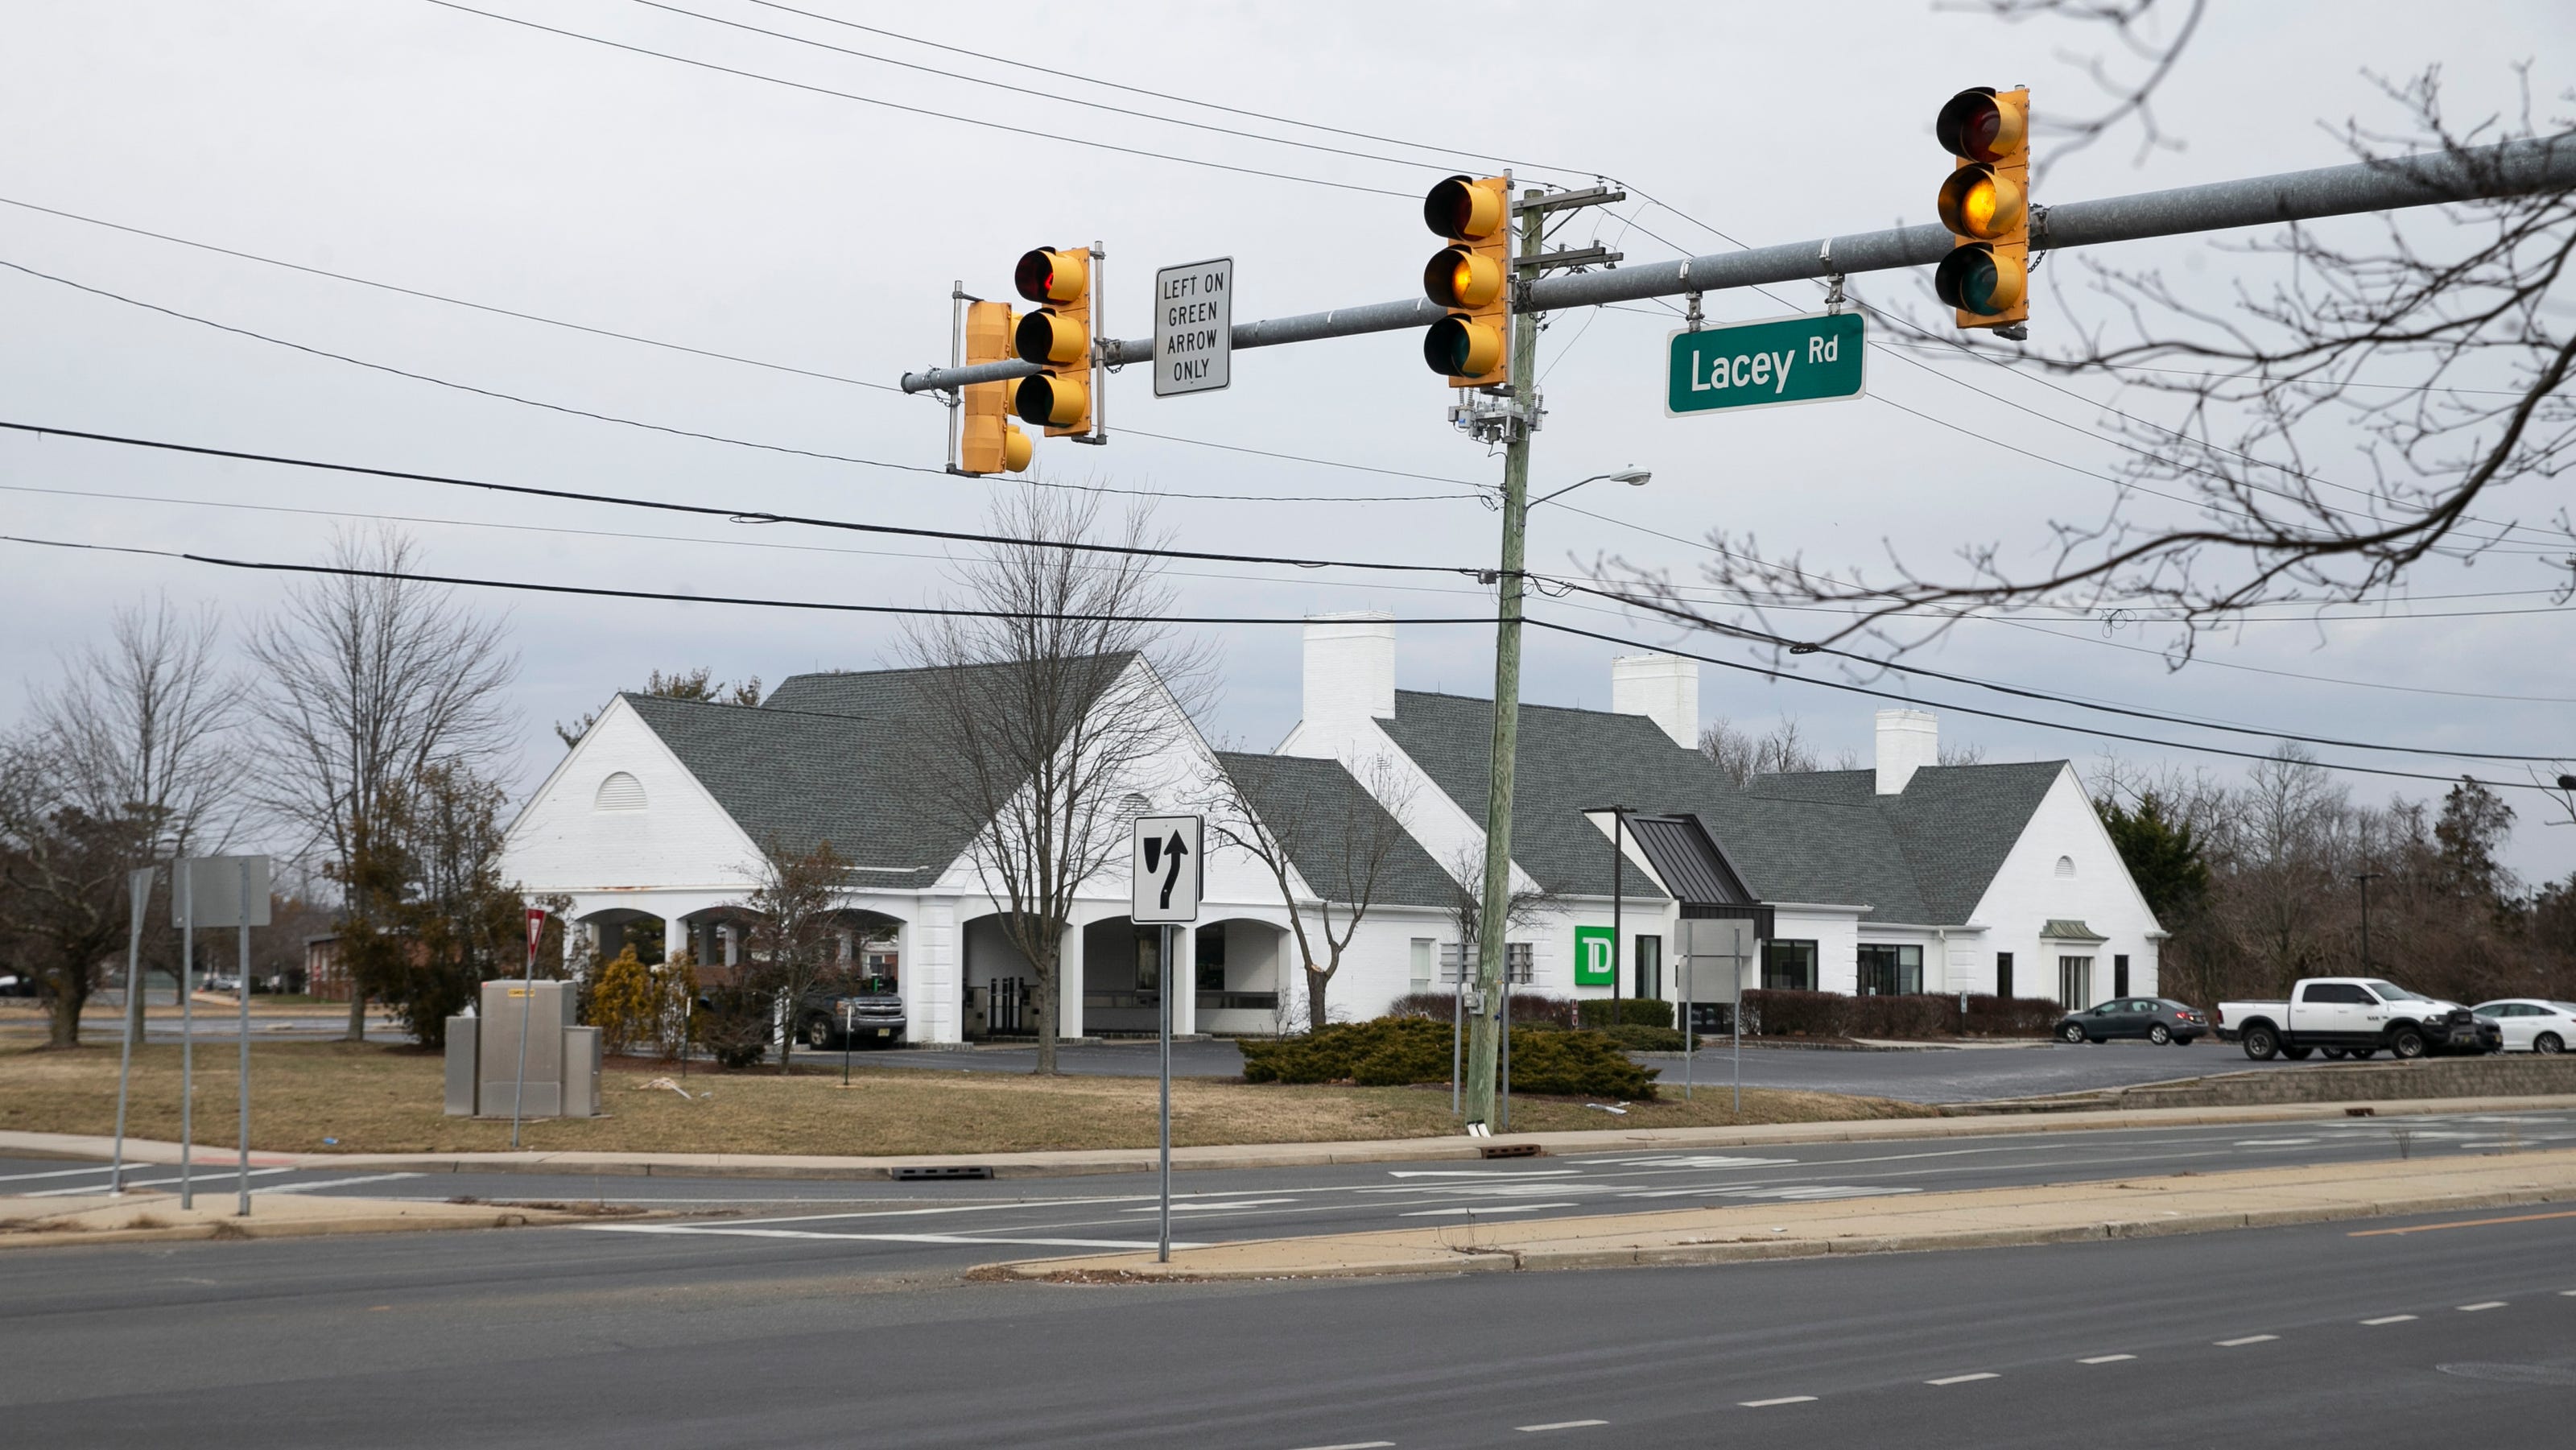 Lacey Township NJ could see another fast-food restaurant near TD Bank